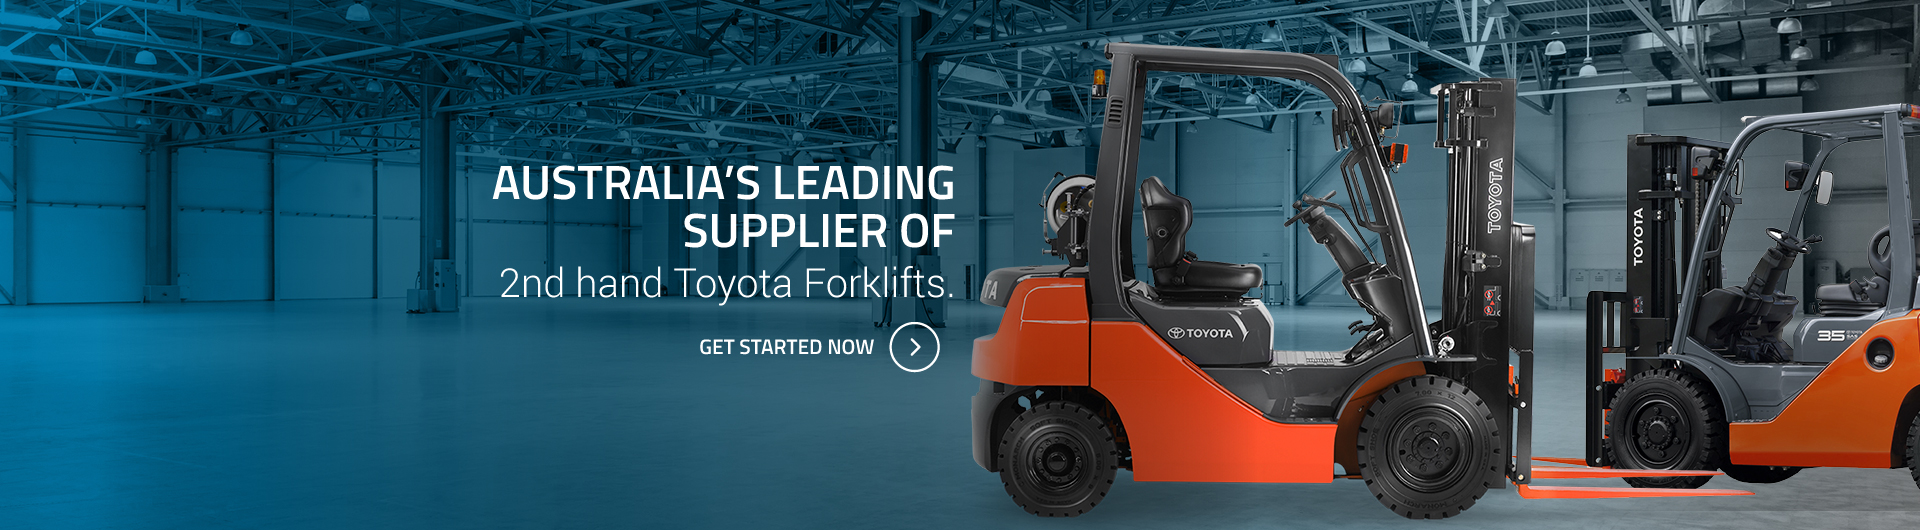 Formidable - Leading Supplier of used Toyota Forklifts